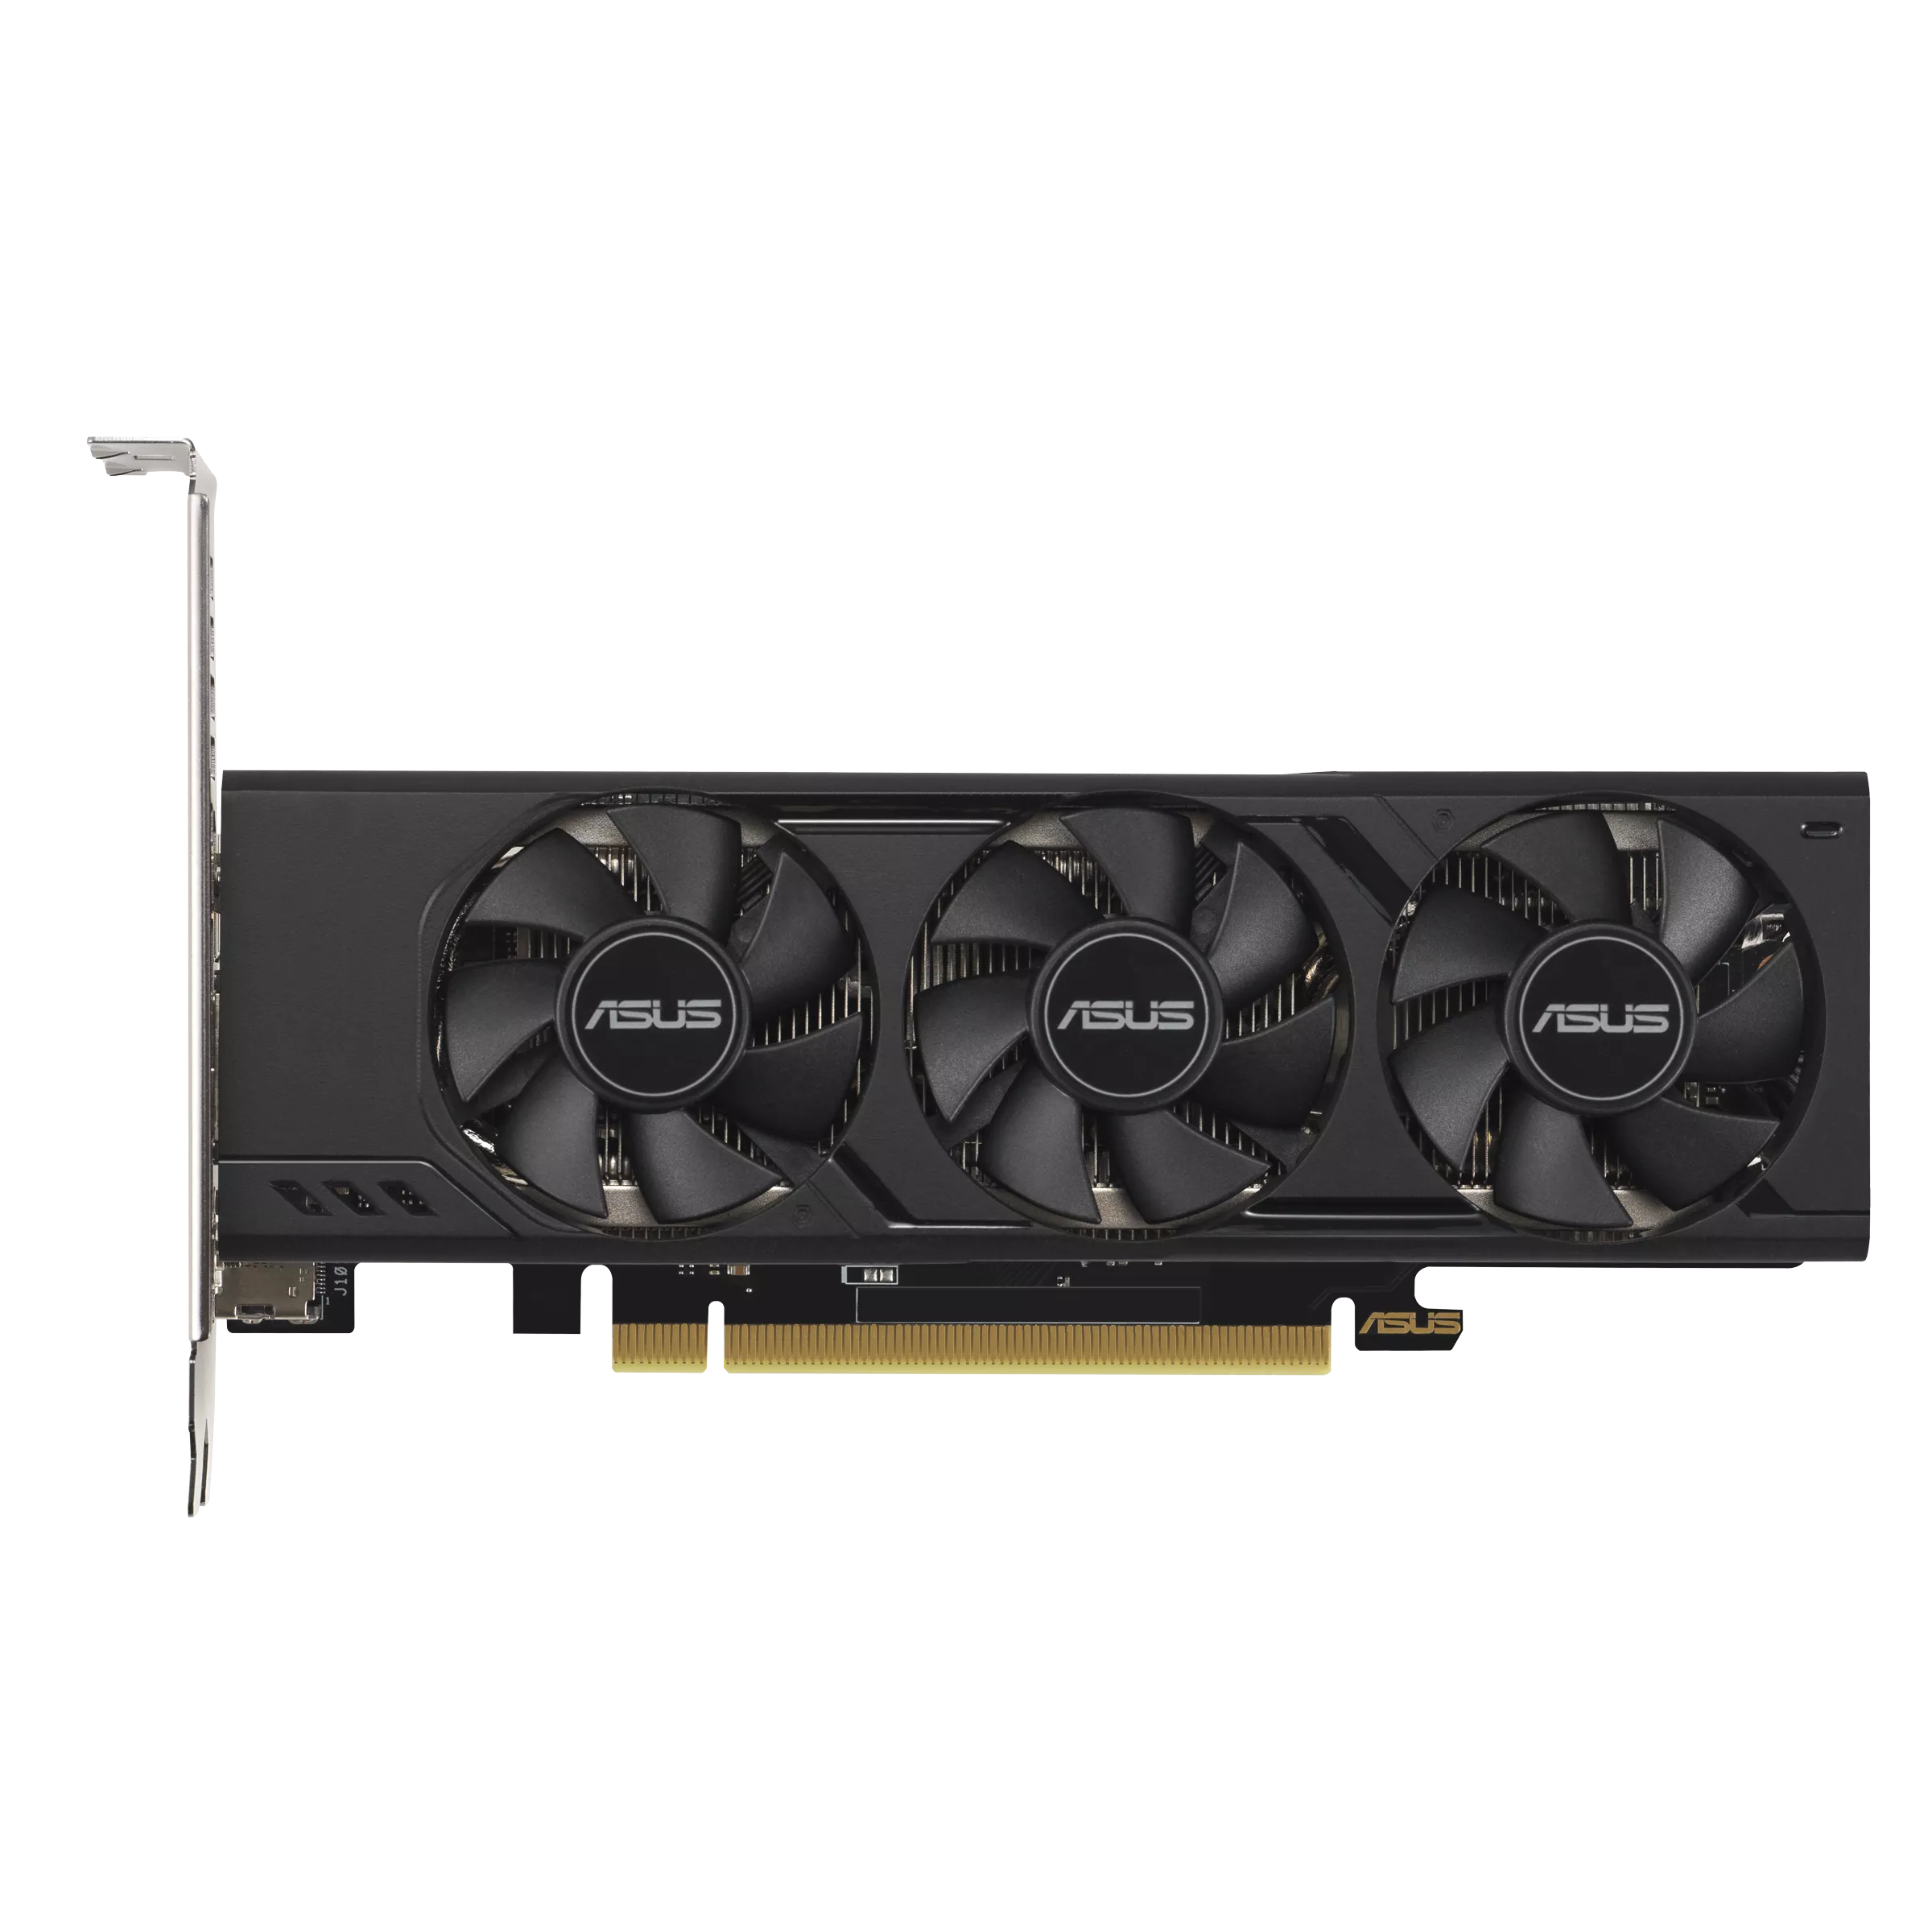 Media asset in full size related to 3dfxzone.it news item entitled as follows: ASUS introduce la card factory-overclocked GeForce RTX 4060 LP BRK 8GB GDDR6 | Image Name: news35225_ASUS-GeForce-RTX-4060-LP-BRK-8GB-GDDR6_3.png